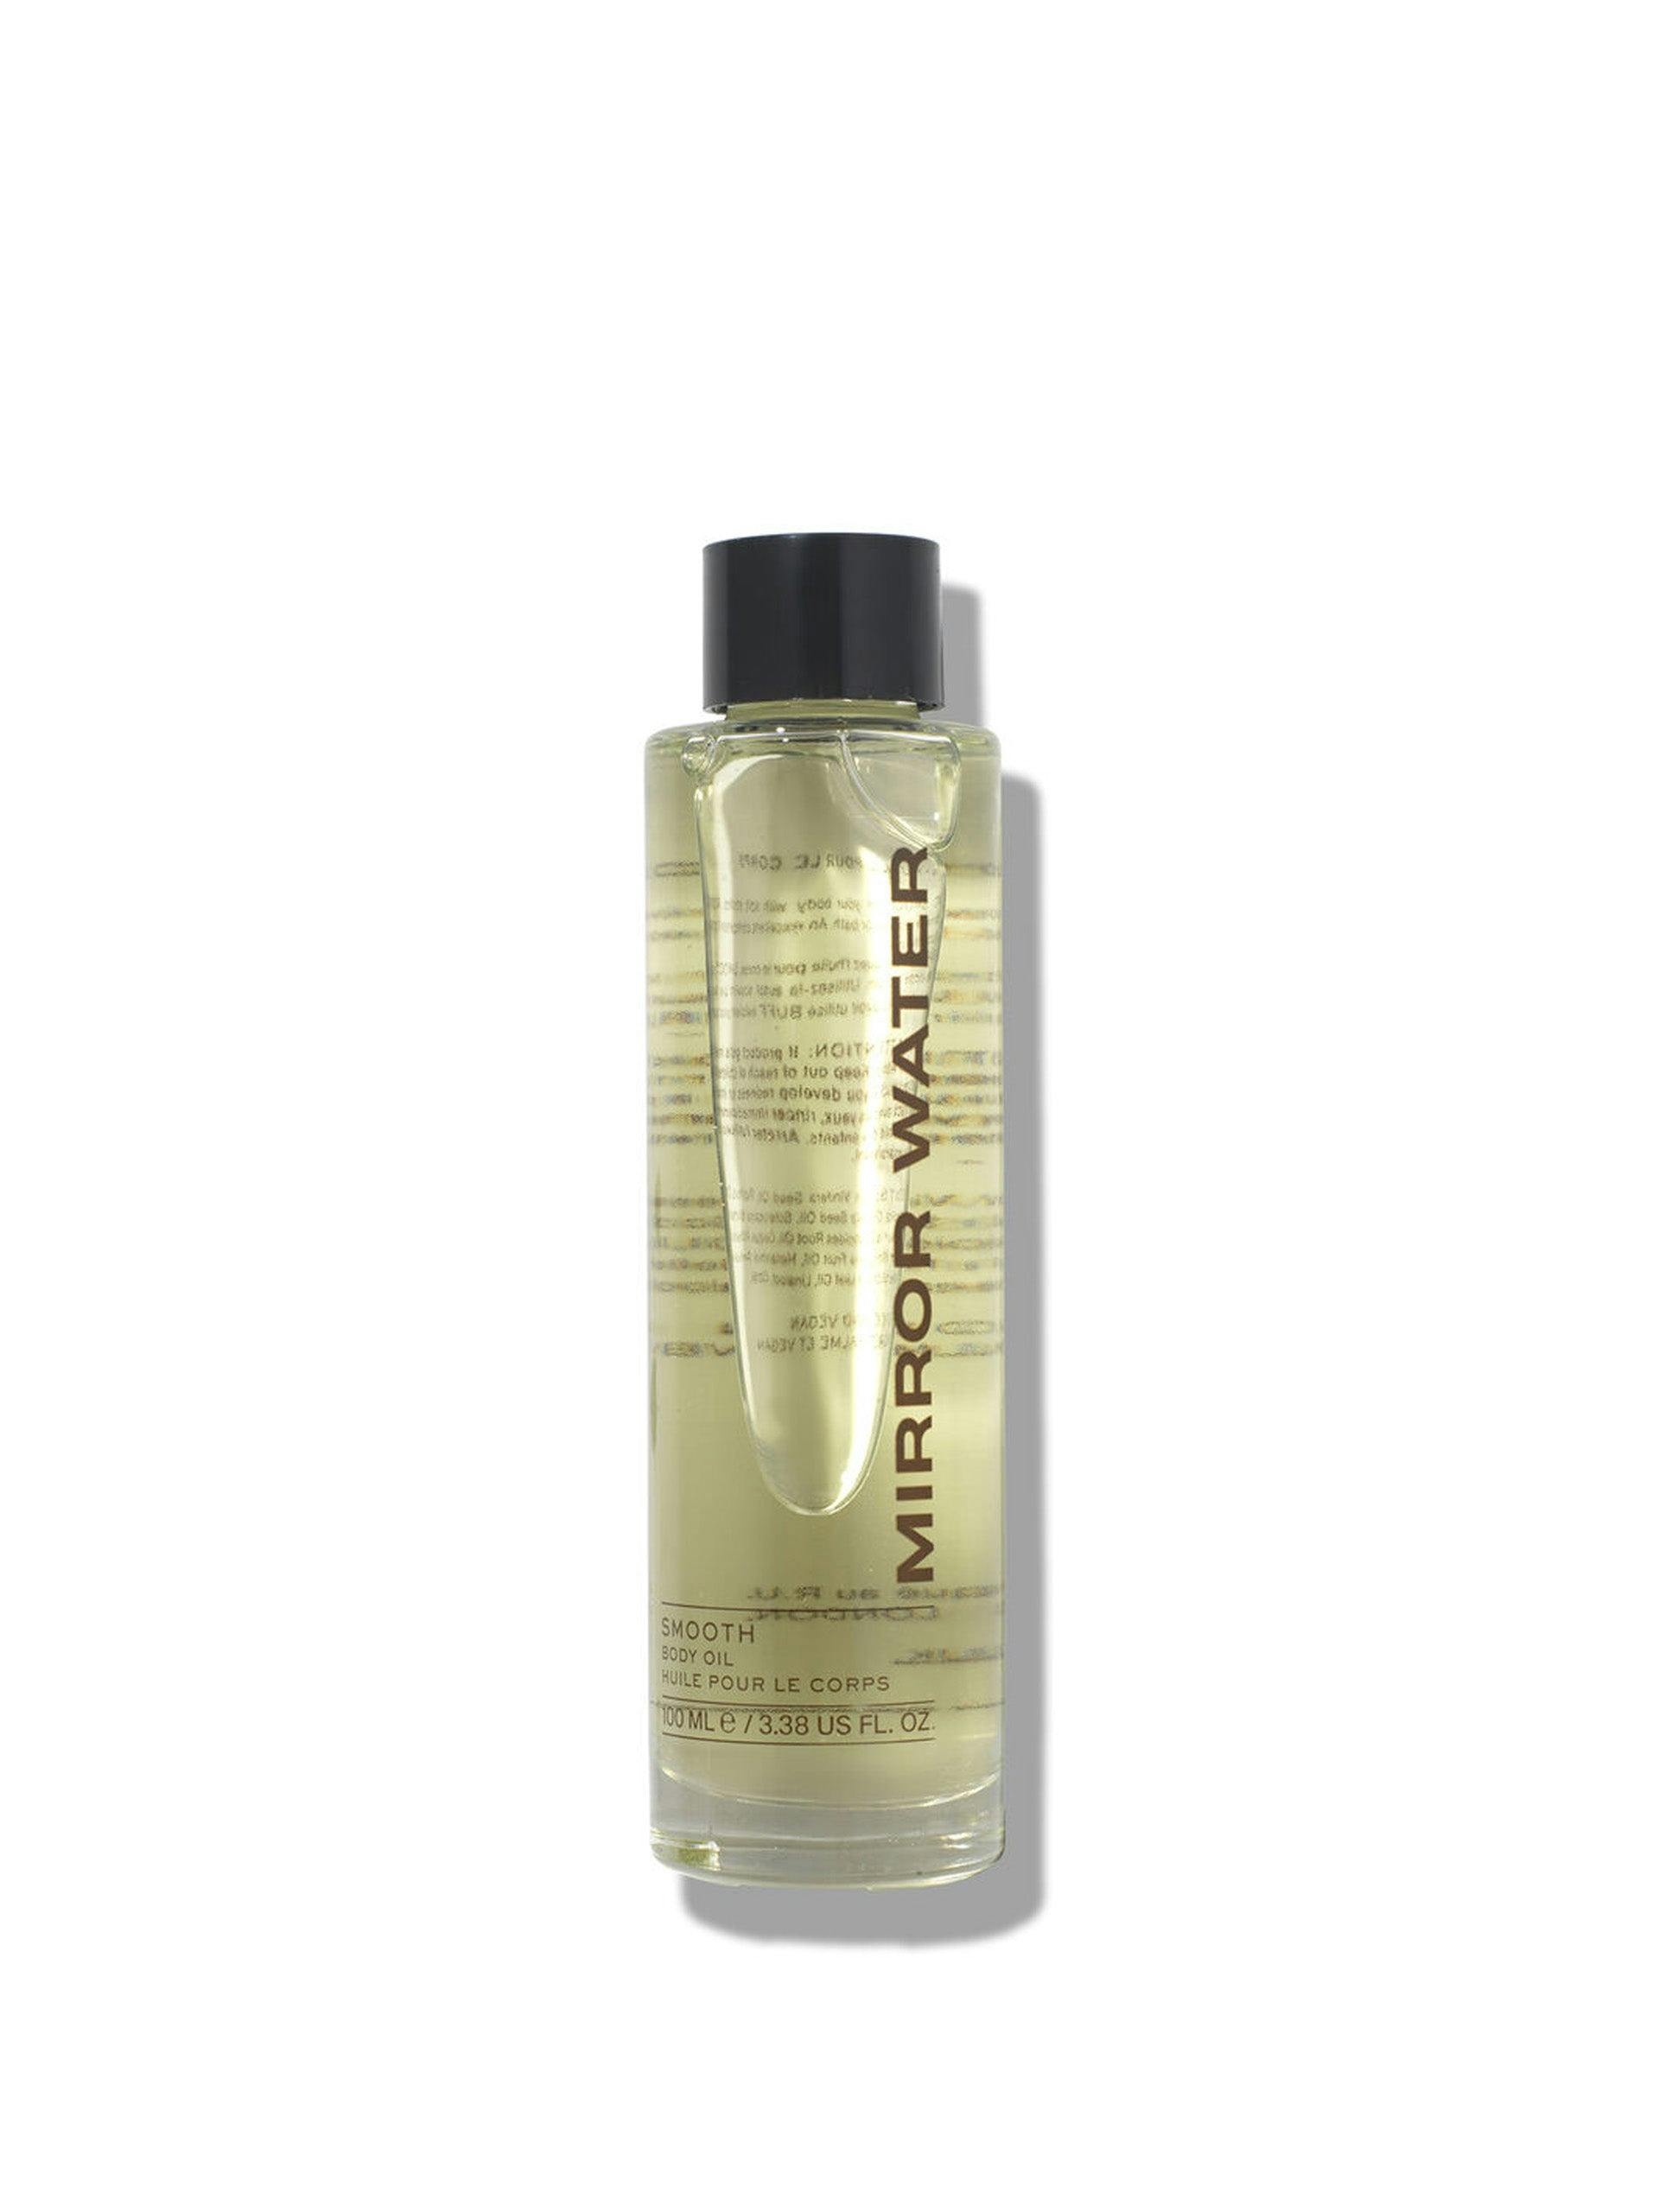 Smooth body oil